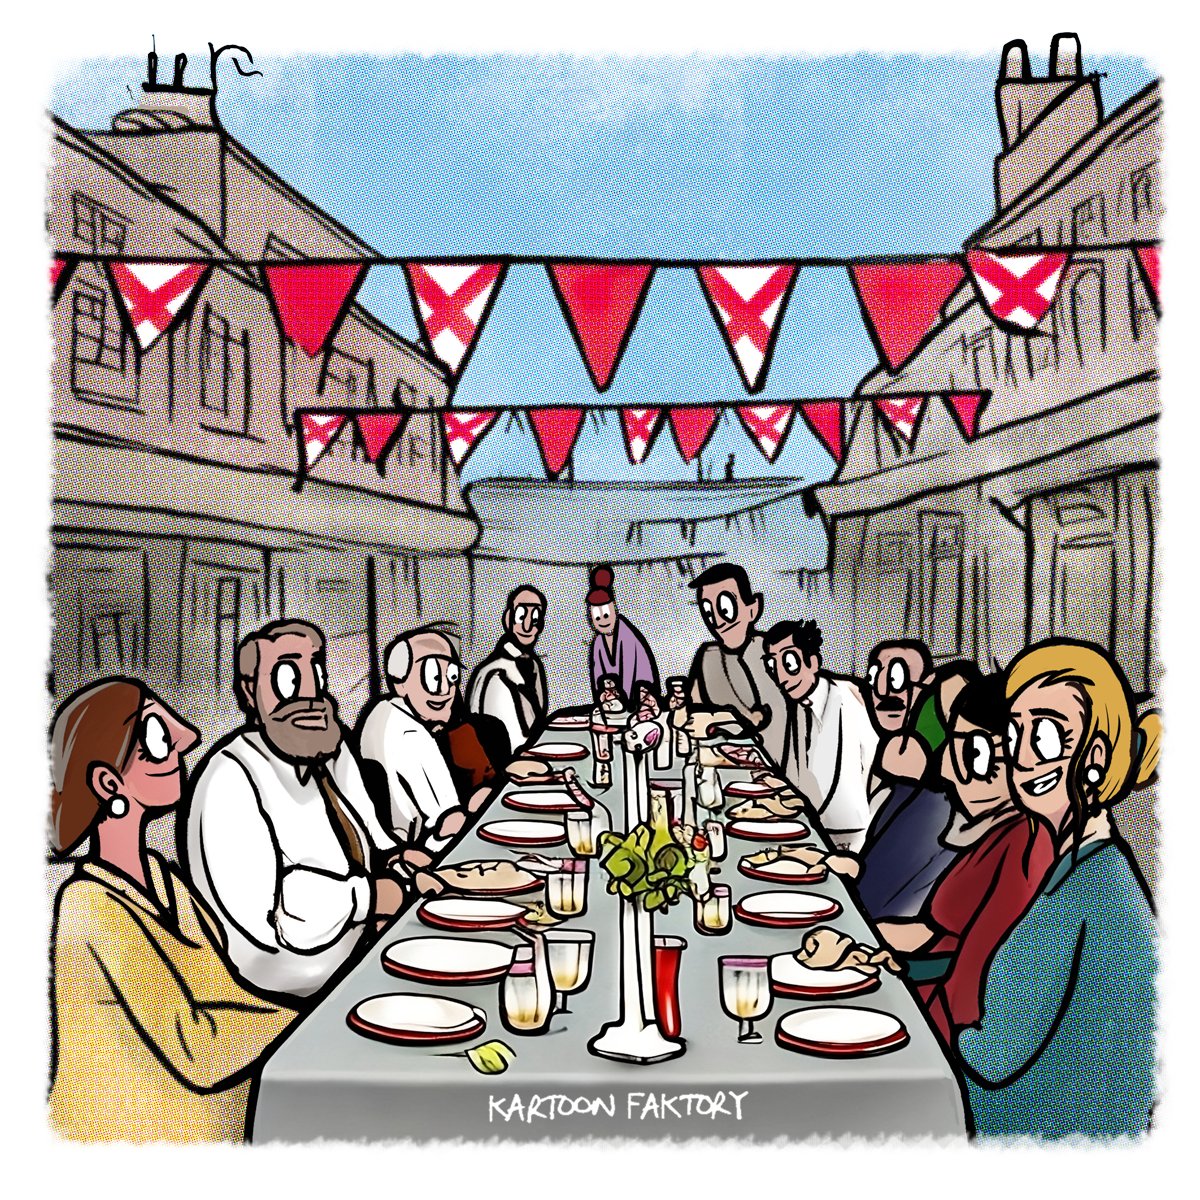 Every June, The Big Lunch brings millions of people together to share friendship, food and fun for the UK’s annual celebration for neighbours and communities....will you be joining in?

#TheBigLunch #Neighbours #Friends #cartoons #KartoonFaktory #GenuineJersey